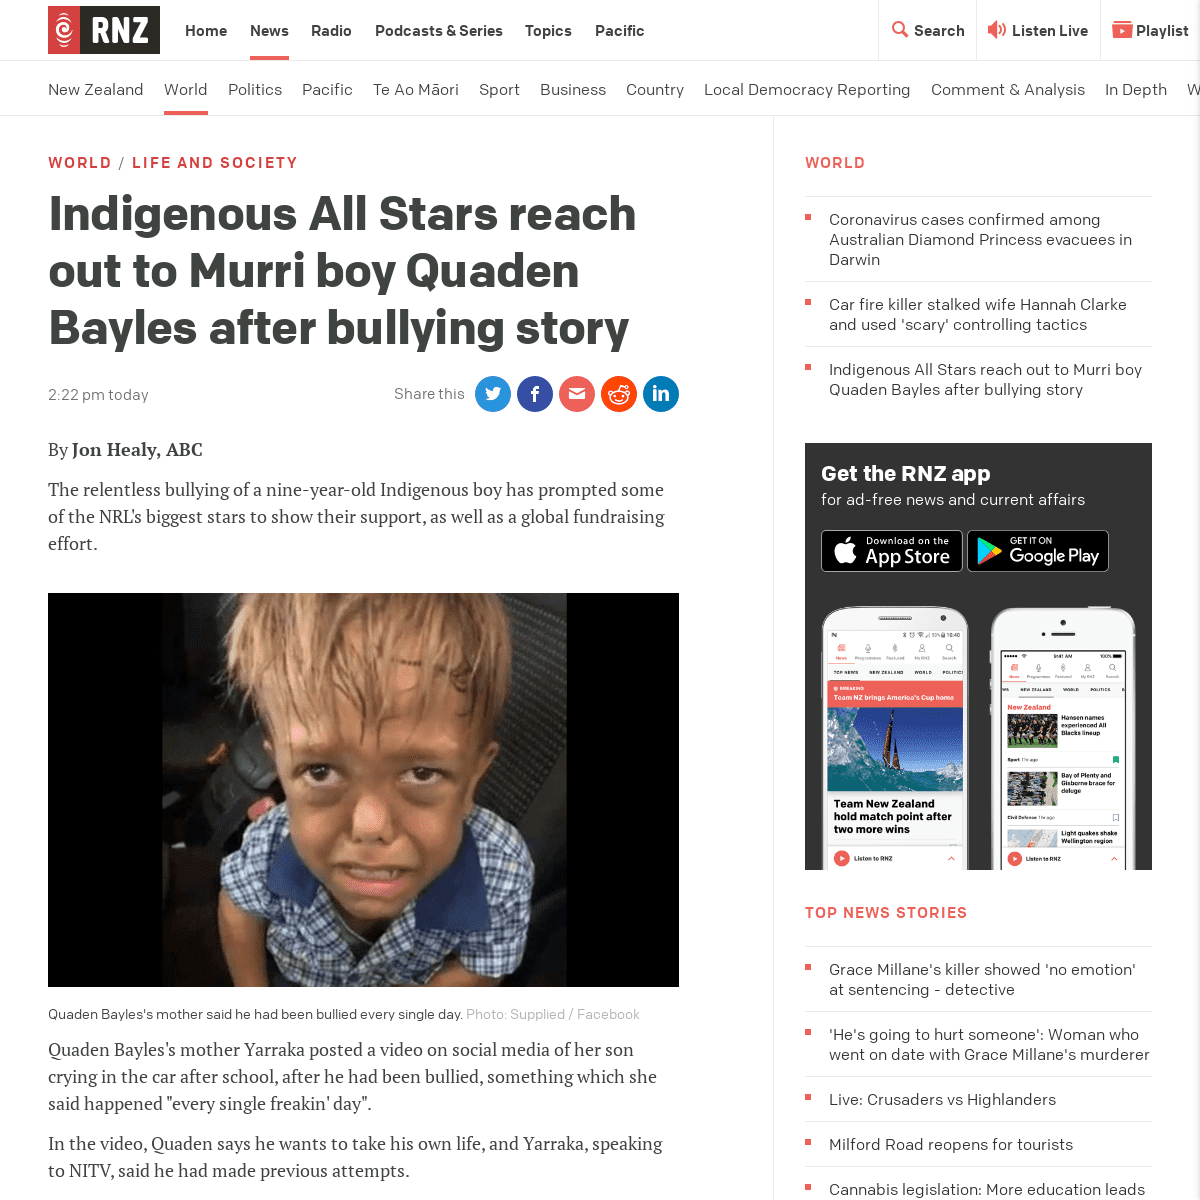 A complete backup of www.rnz.co.nz/news/world/410052/indigenous-all-stars-reach-out-to-murri-boy-quaden-bayles-after-bullying-st